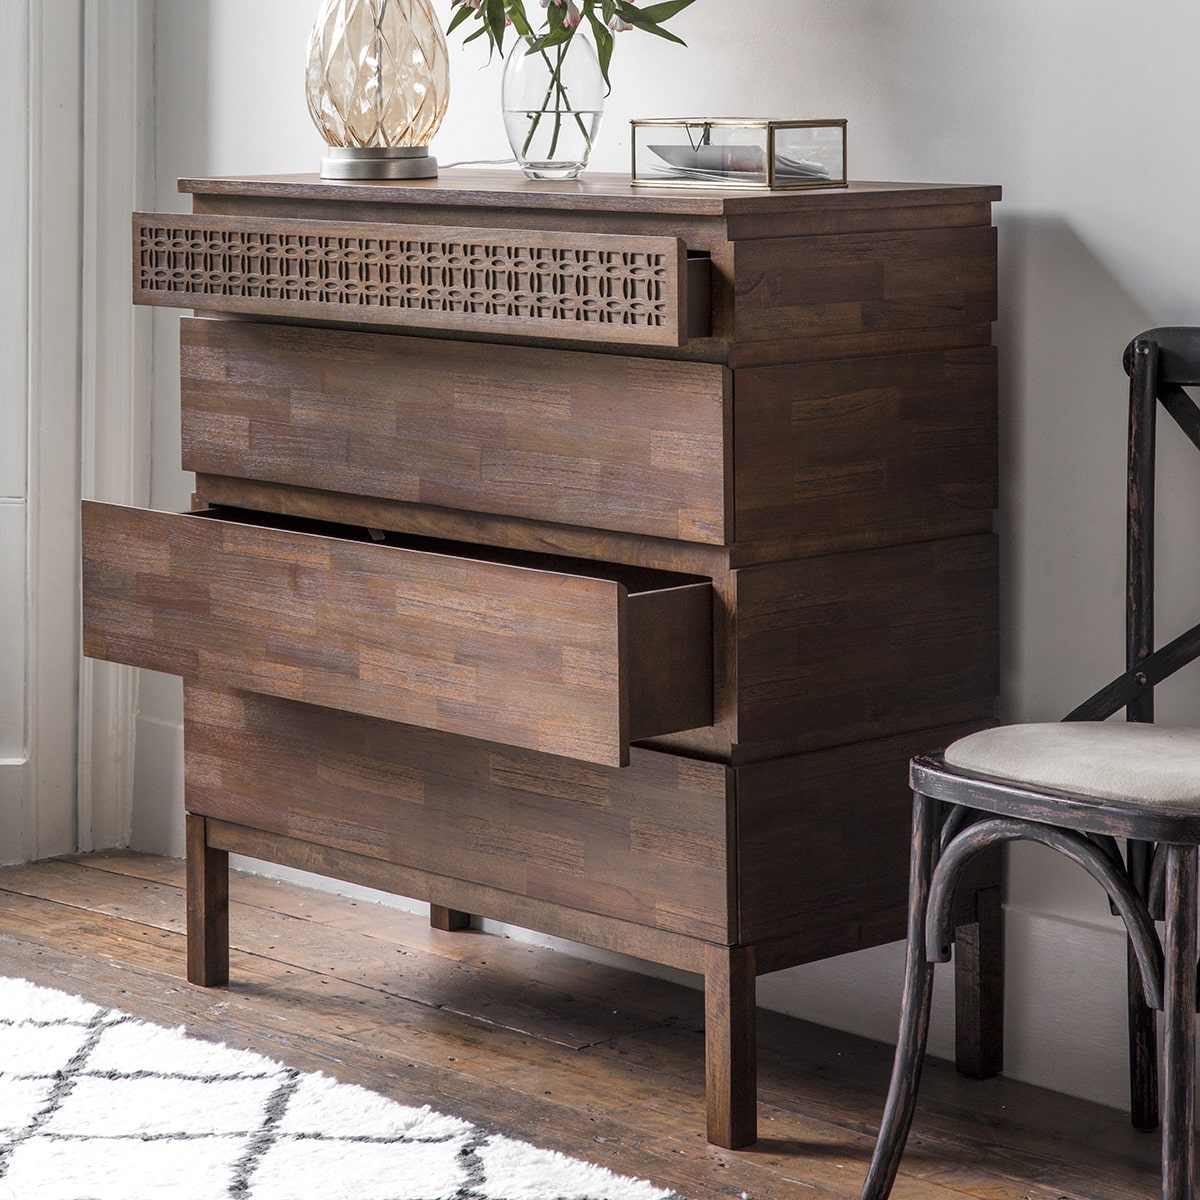 4 drawer chest in brown pictured showcasing storage with 2 drawers partly open in a room setting with decor.